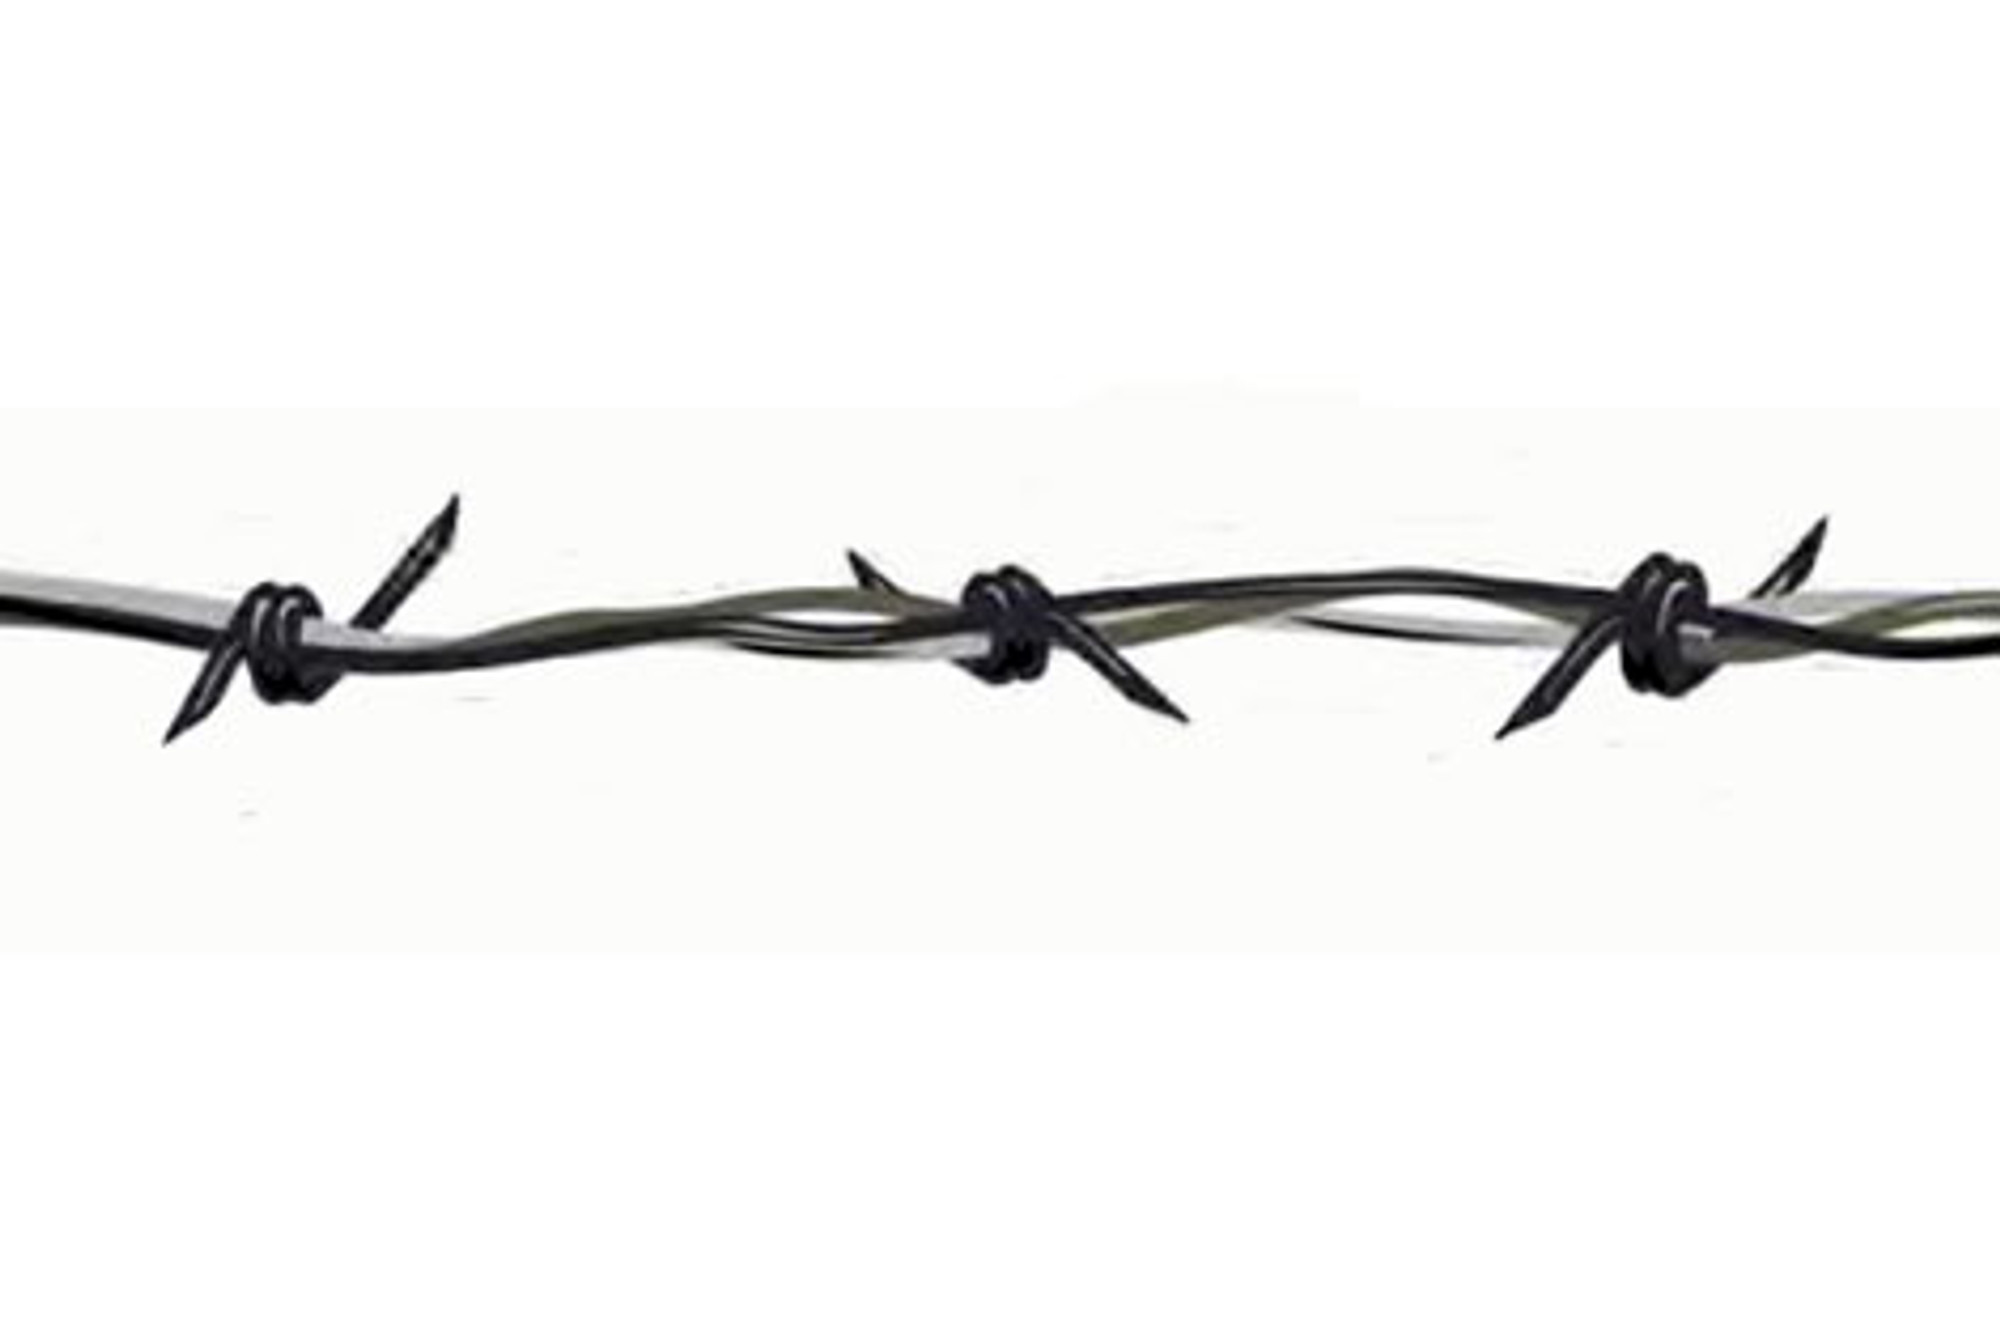 the barbed wire